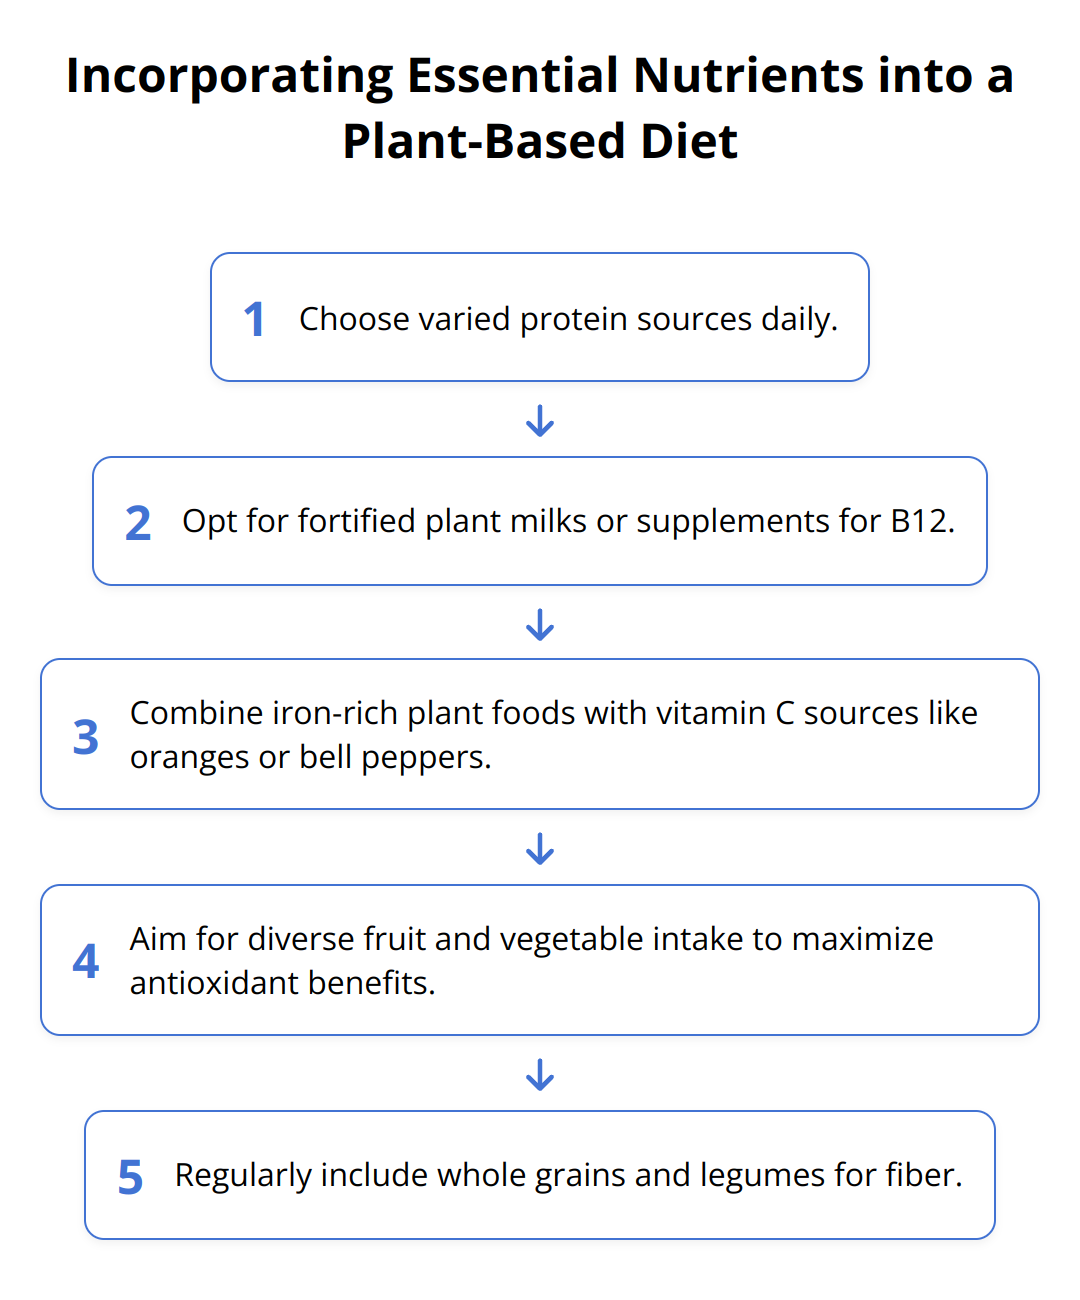 Flow Chart - Incorporating Essential Nutrients into a Plant-Based Diet